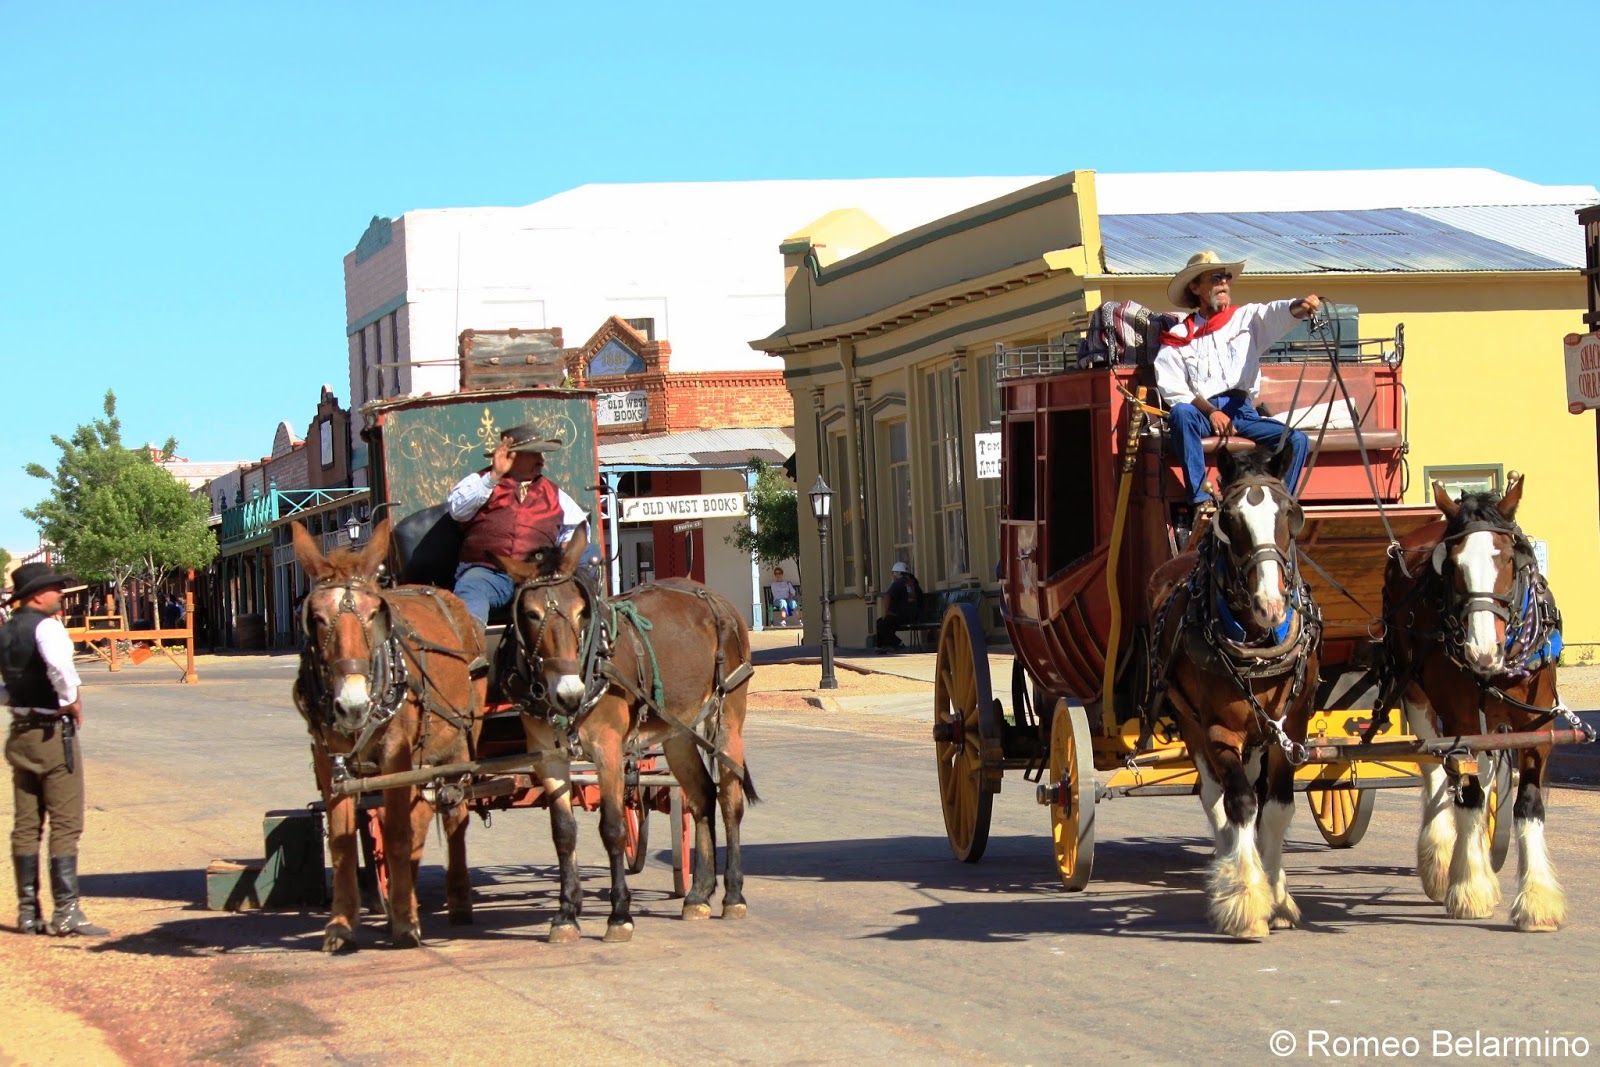 The stagecoach